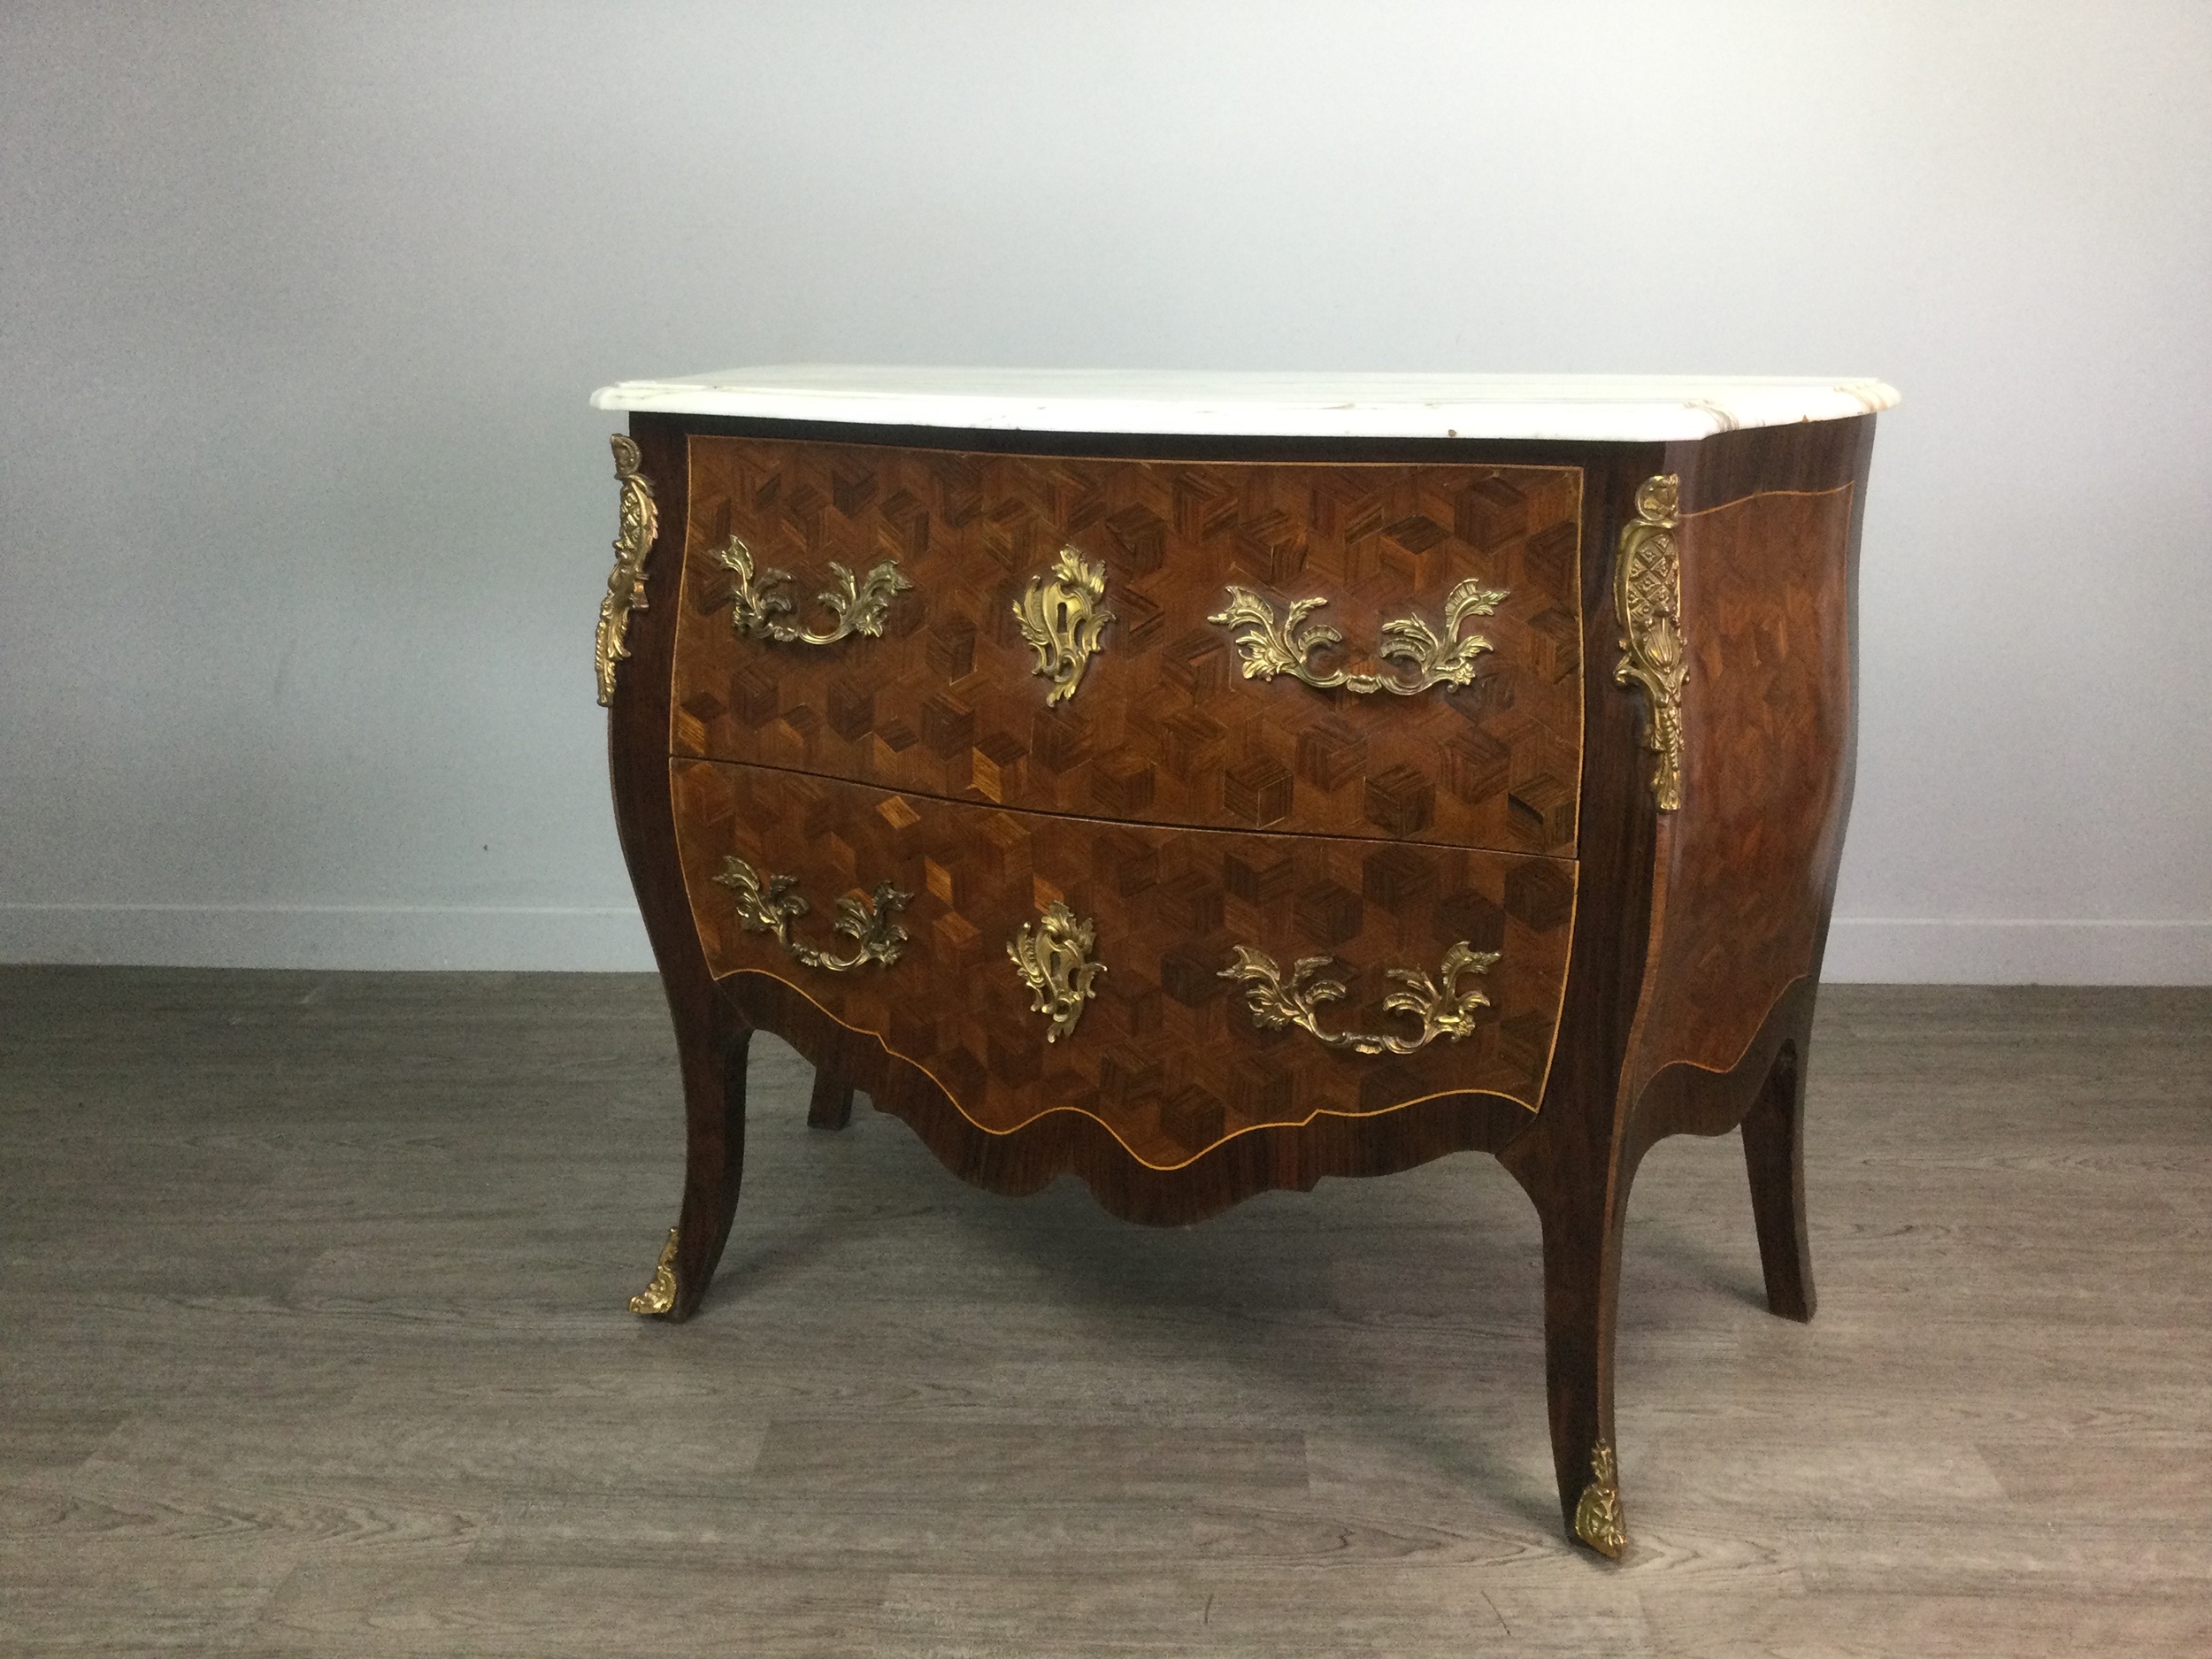 AN IMPRESSIVE GILT METAL MOUNTED ROSEWOOD AND KINGWOOD MARQUETRY COMMODE OF LOUIS XV DESIGN